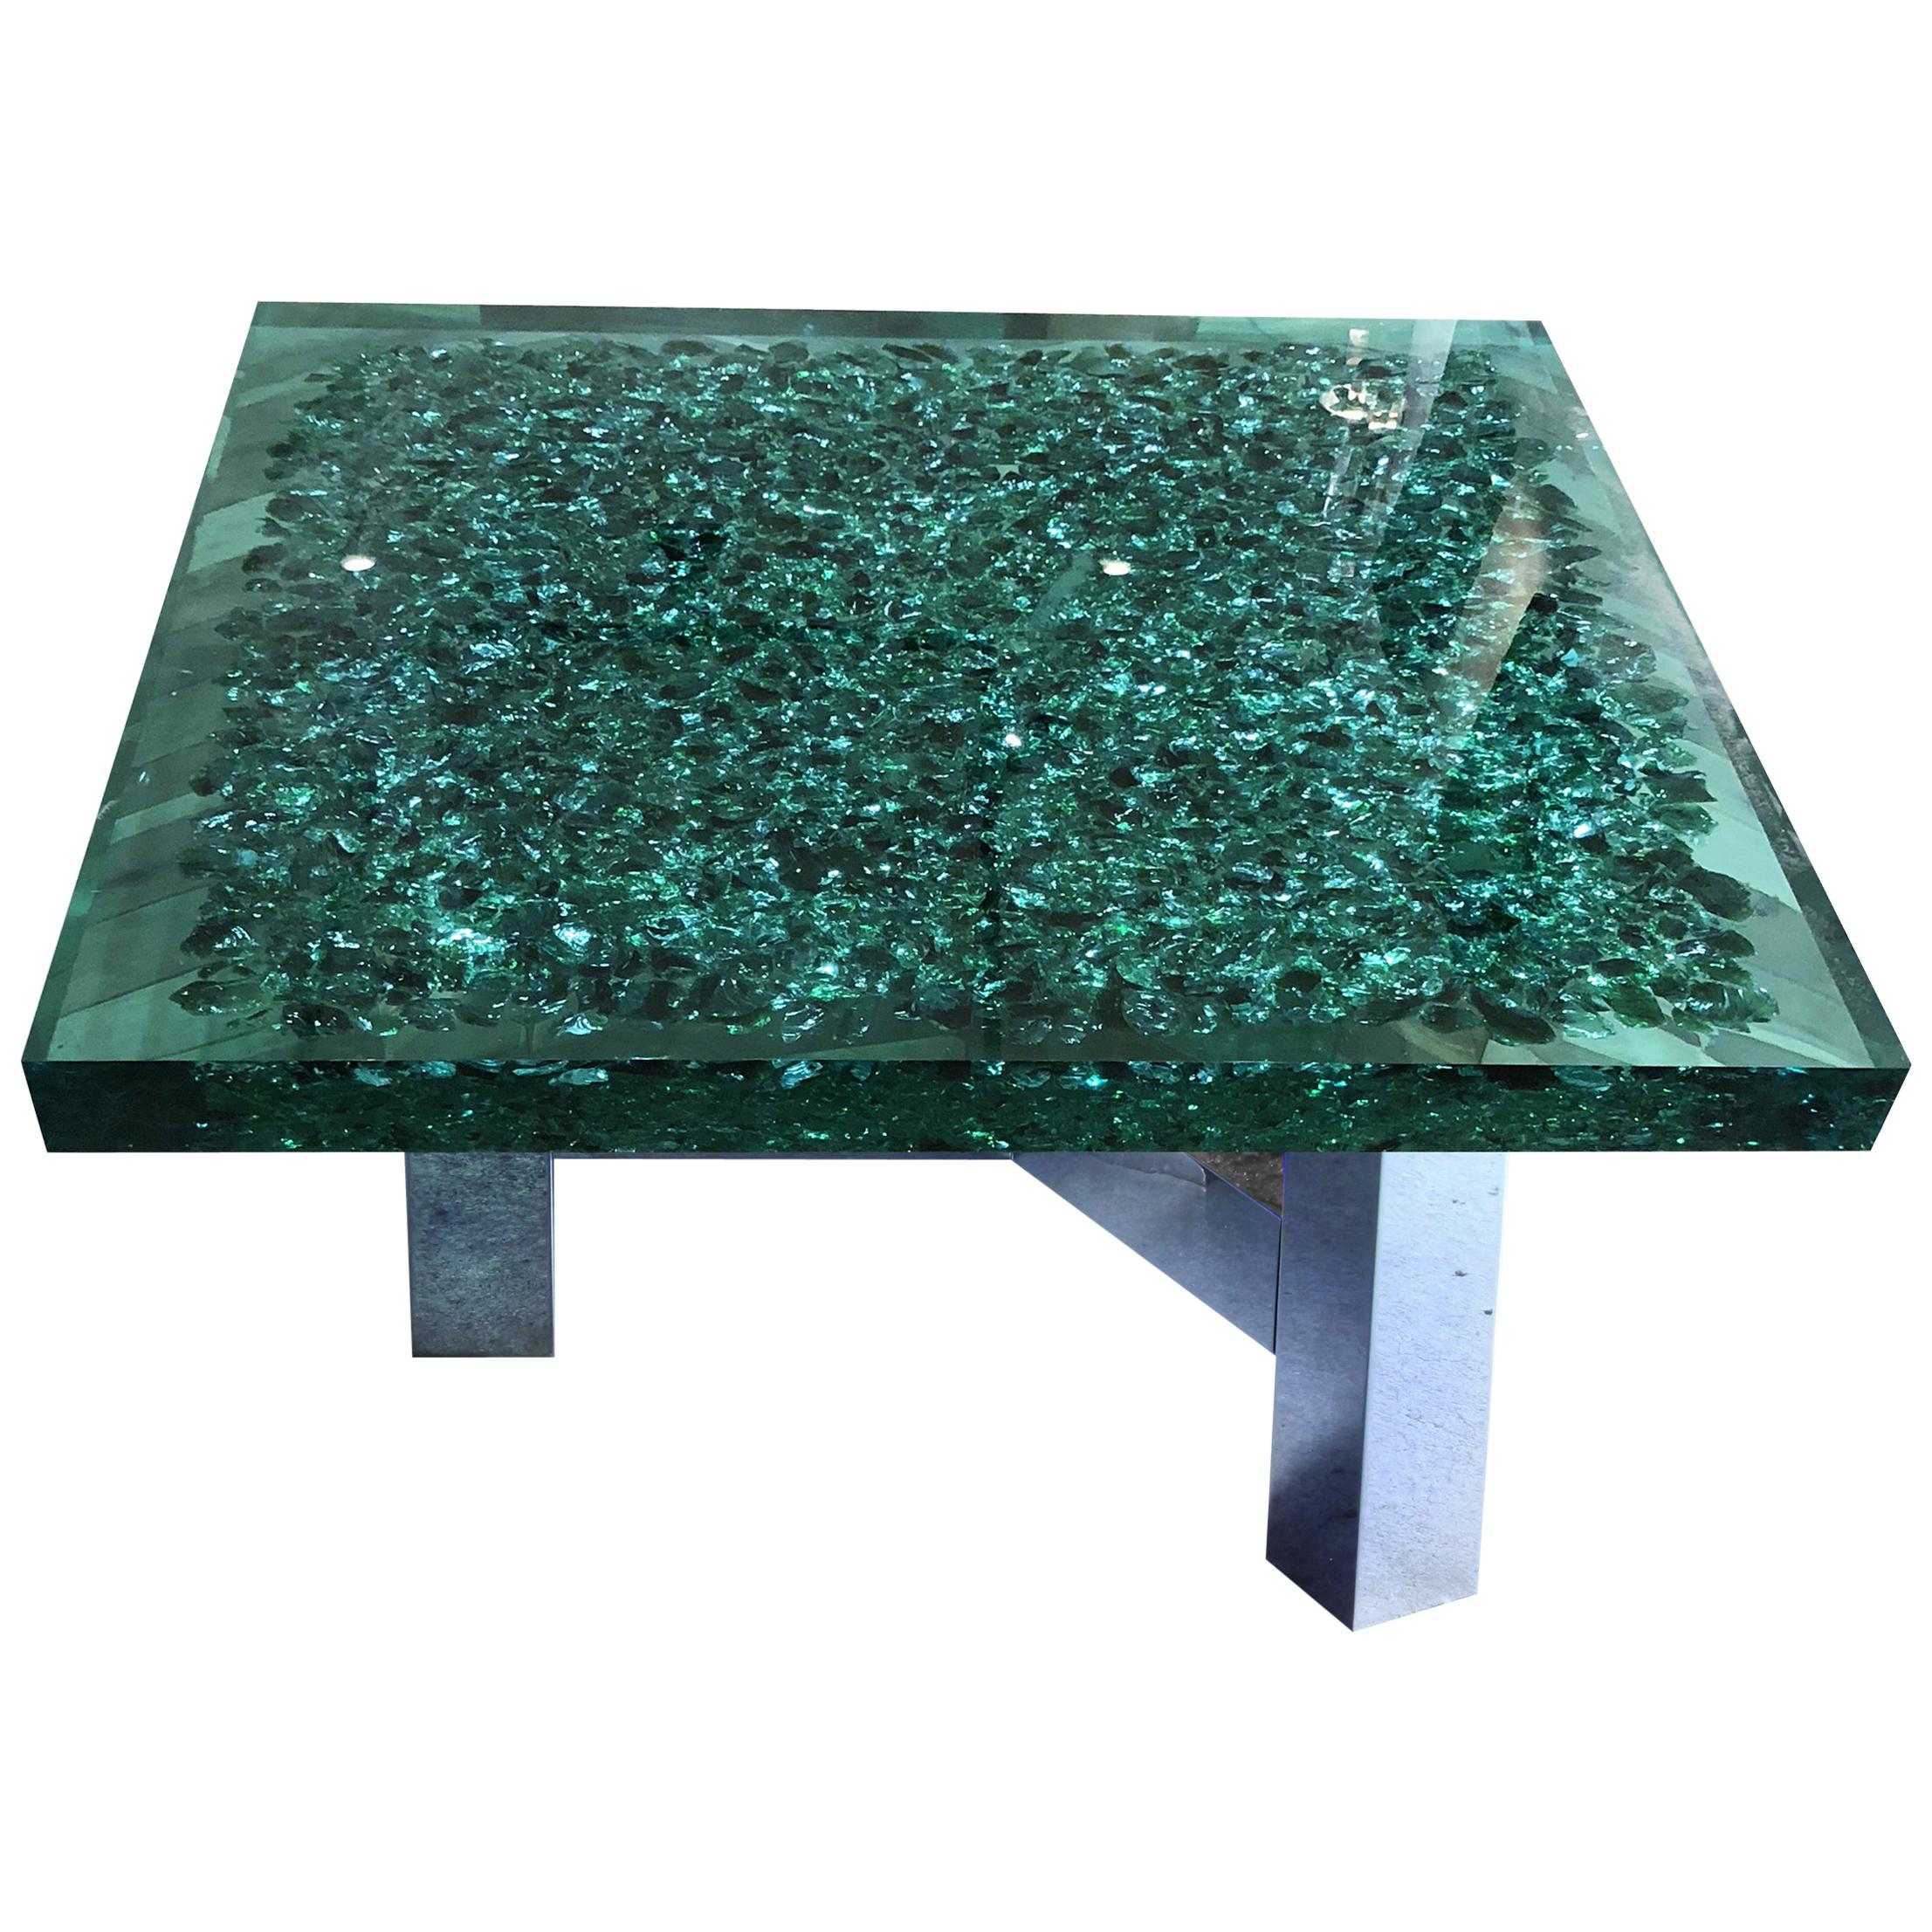 Seafoam Green Lucite and Murano Glass Coffee Table on Brass Base "Riflessioni" For Sale